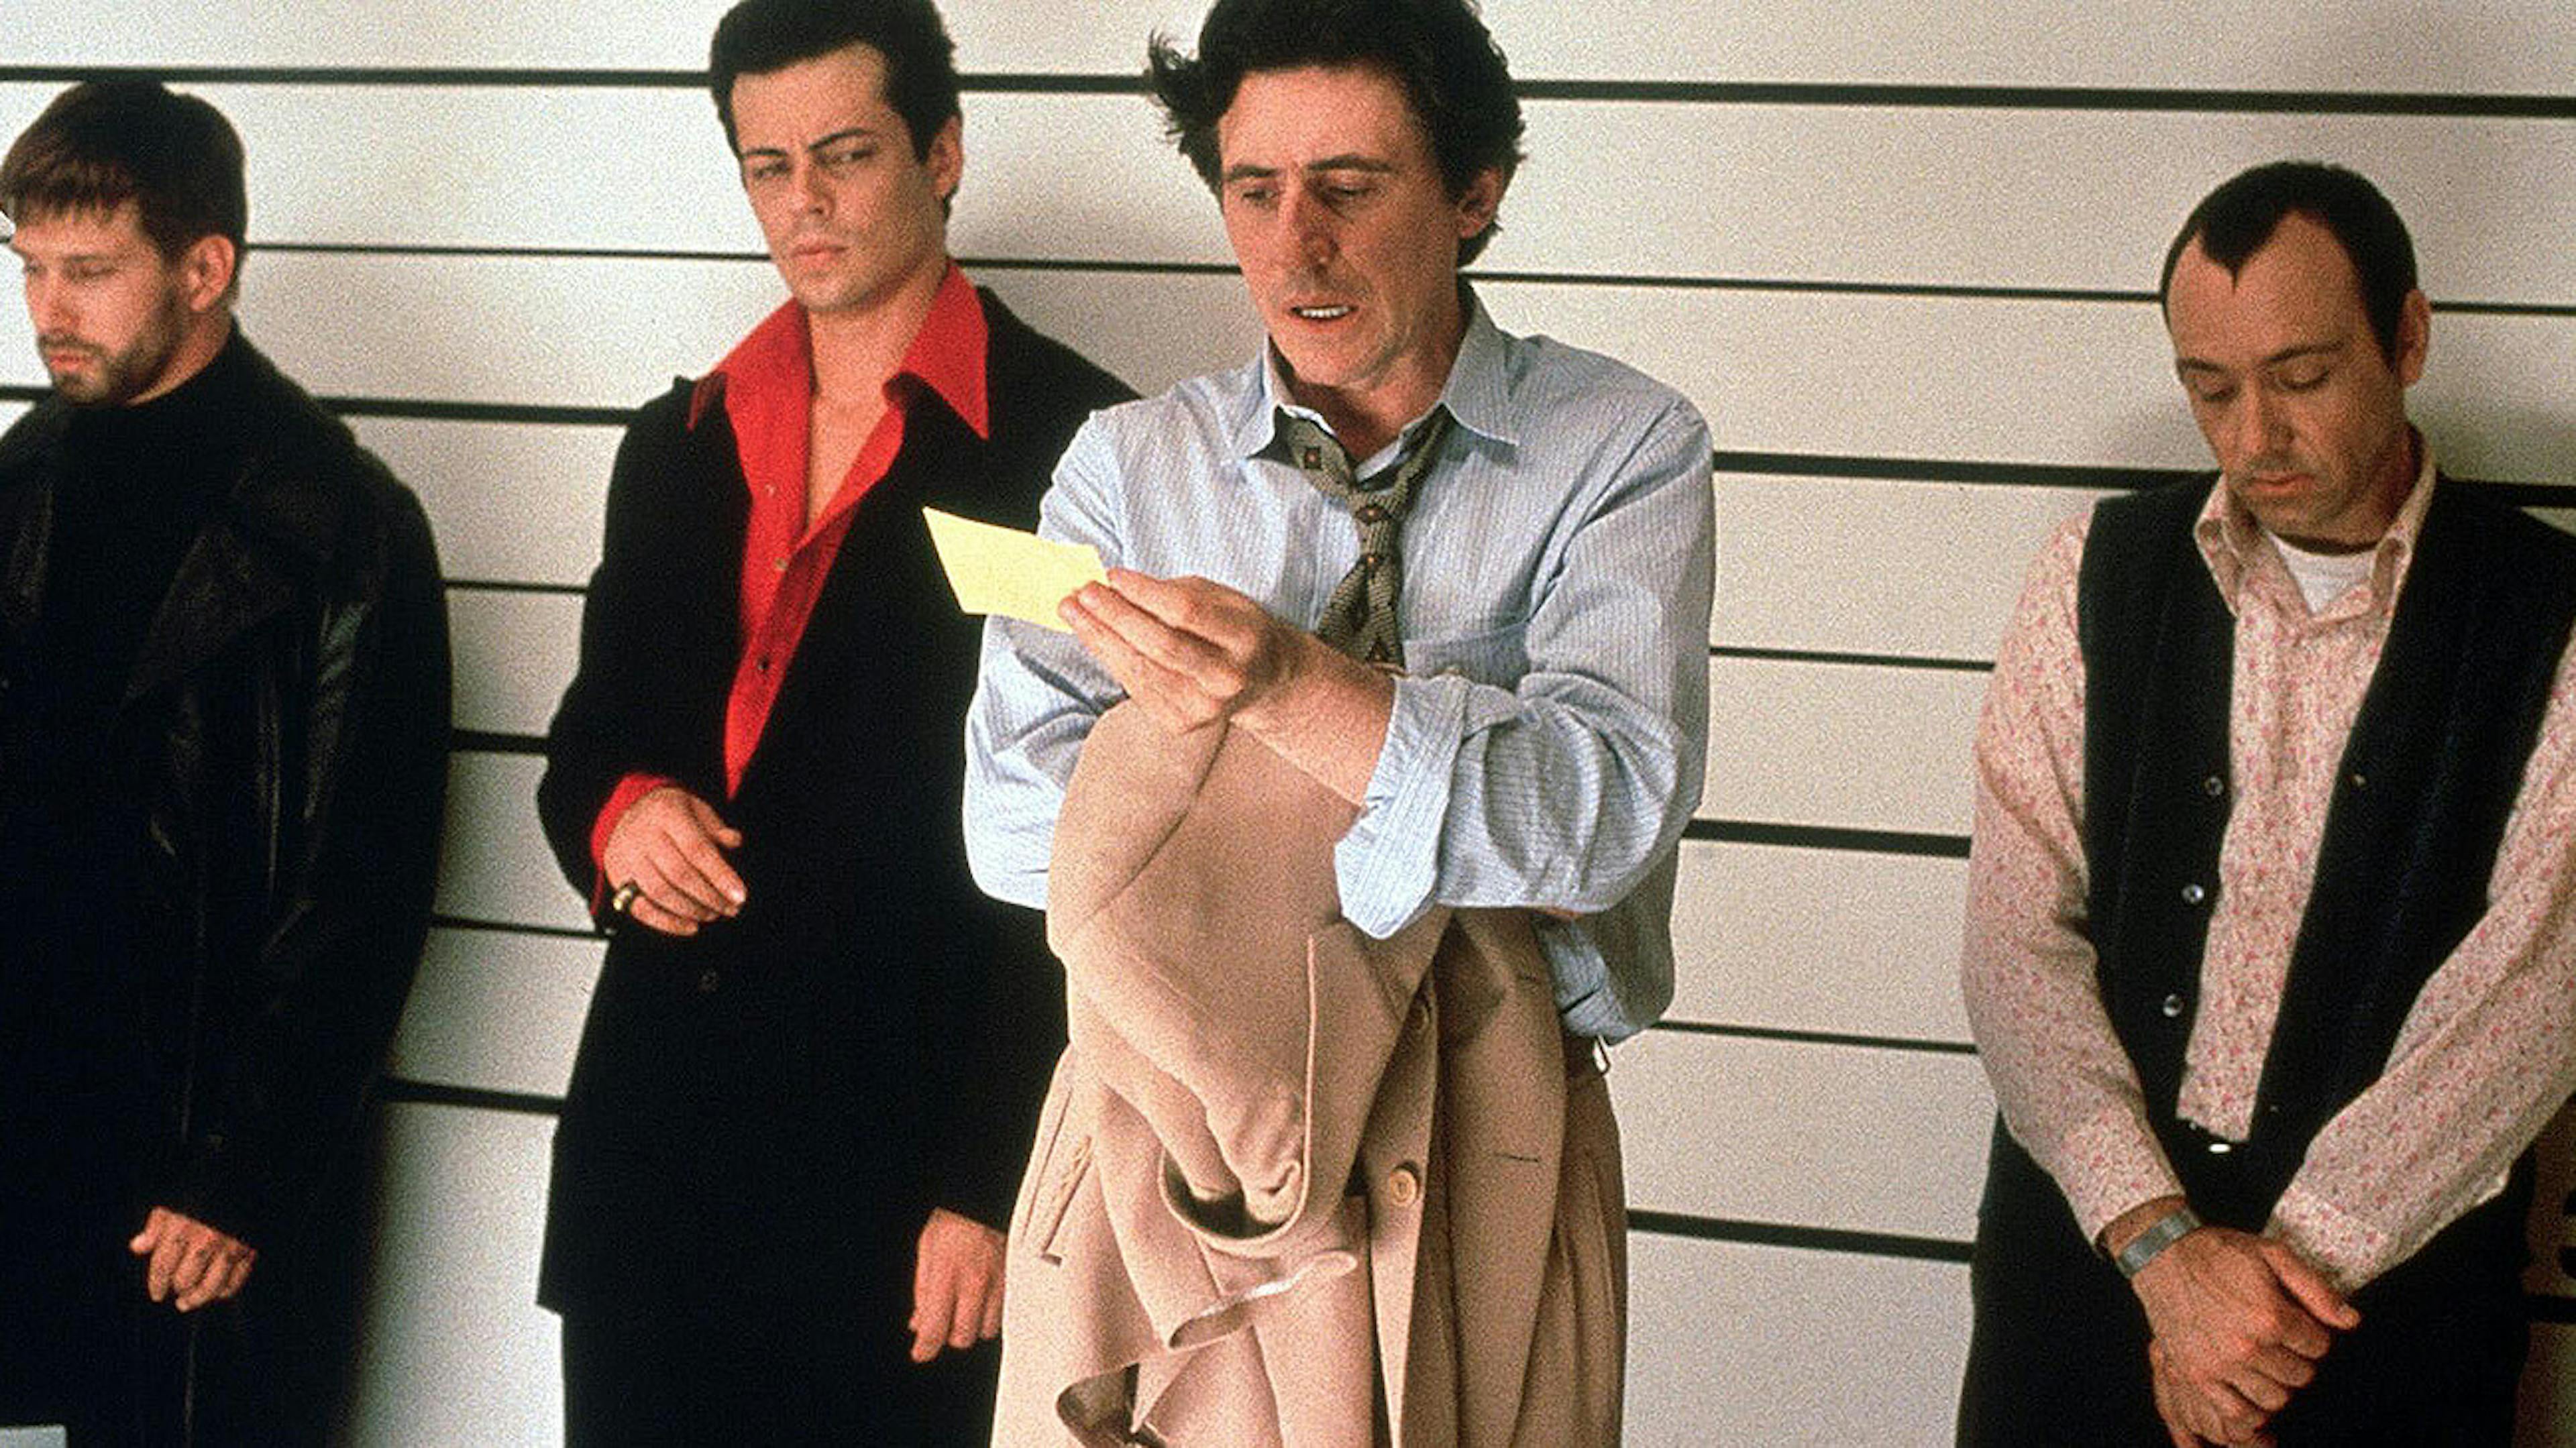 Still from the movie The Usual Suspects